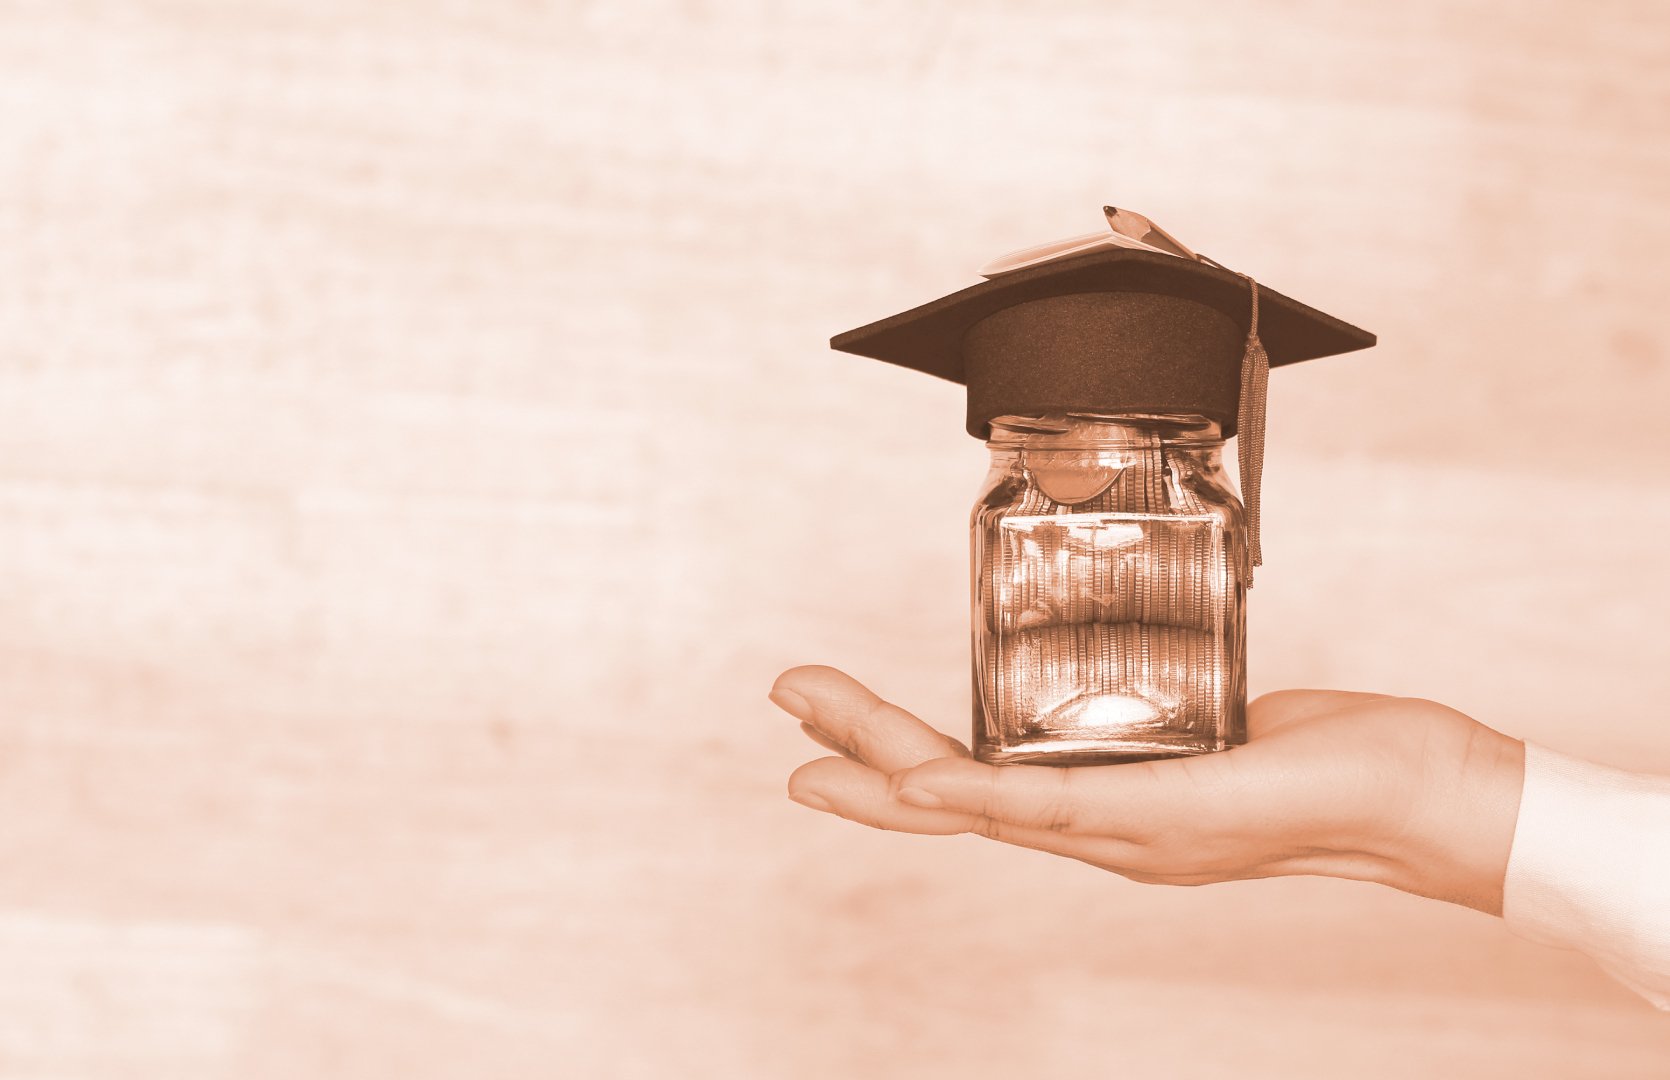 Header image of a hand with a jar full of coins and a greaduation cap on top of the jar